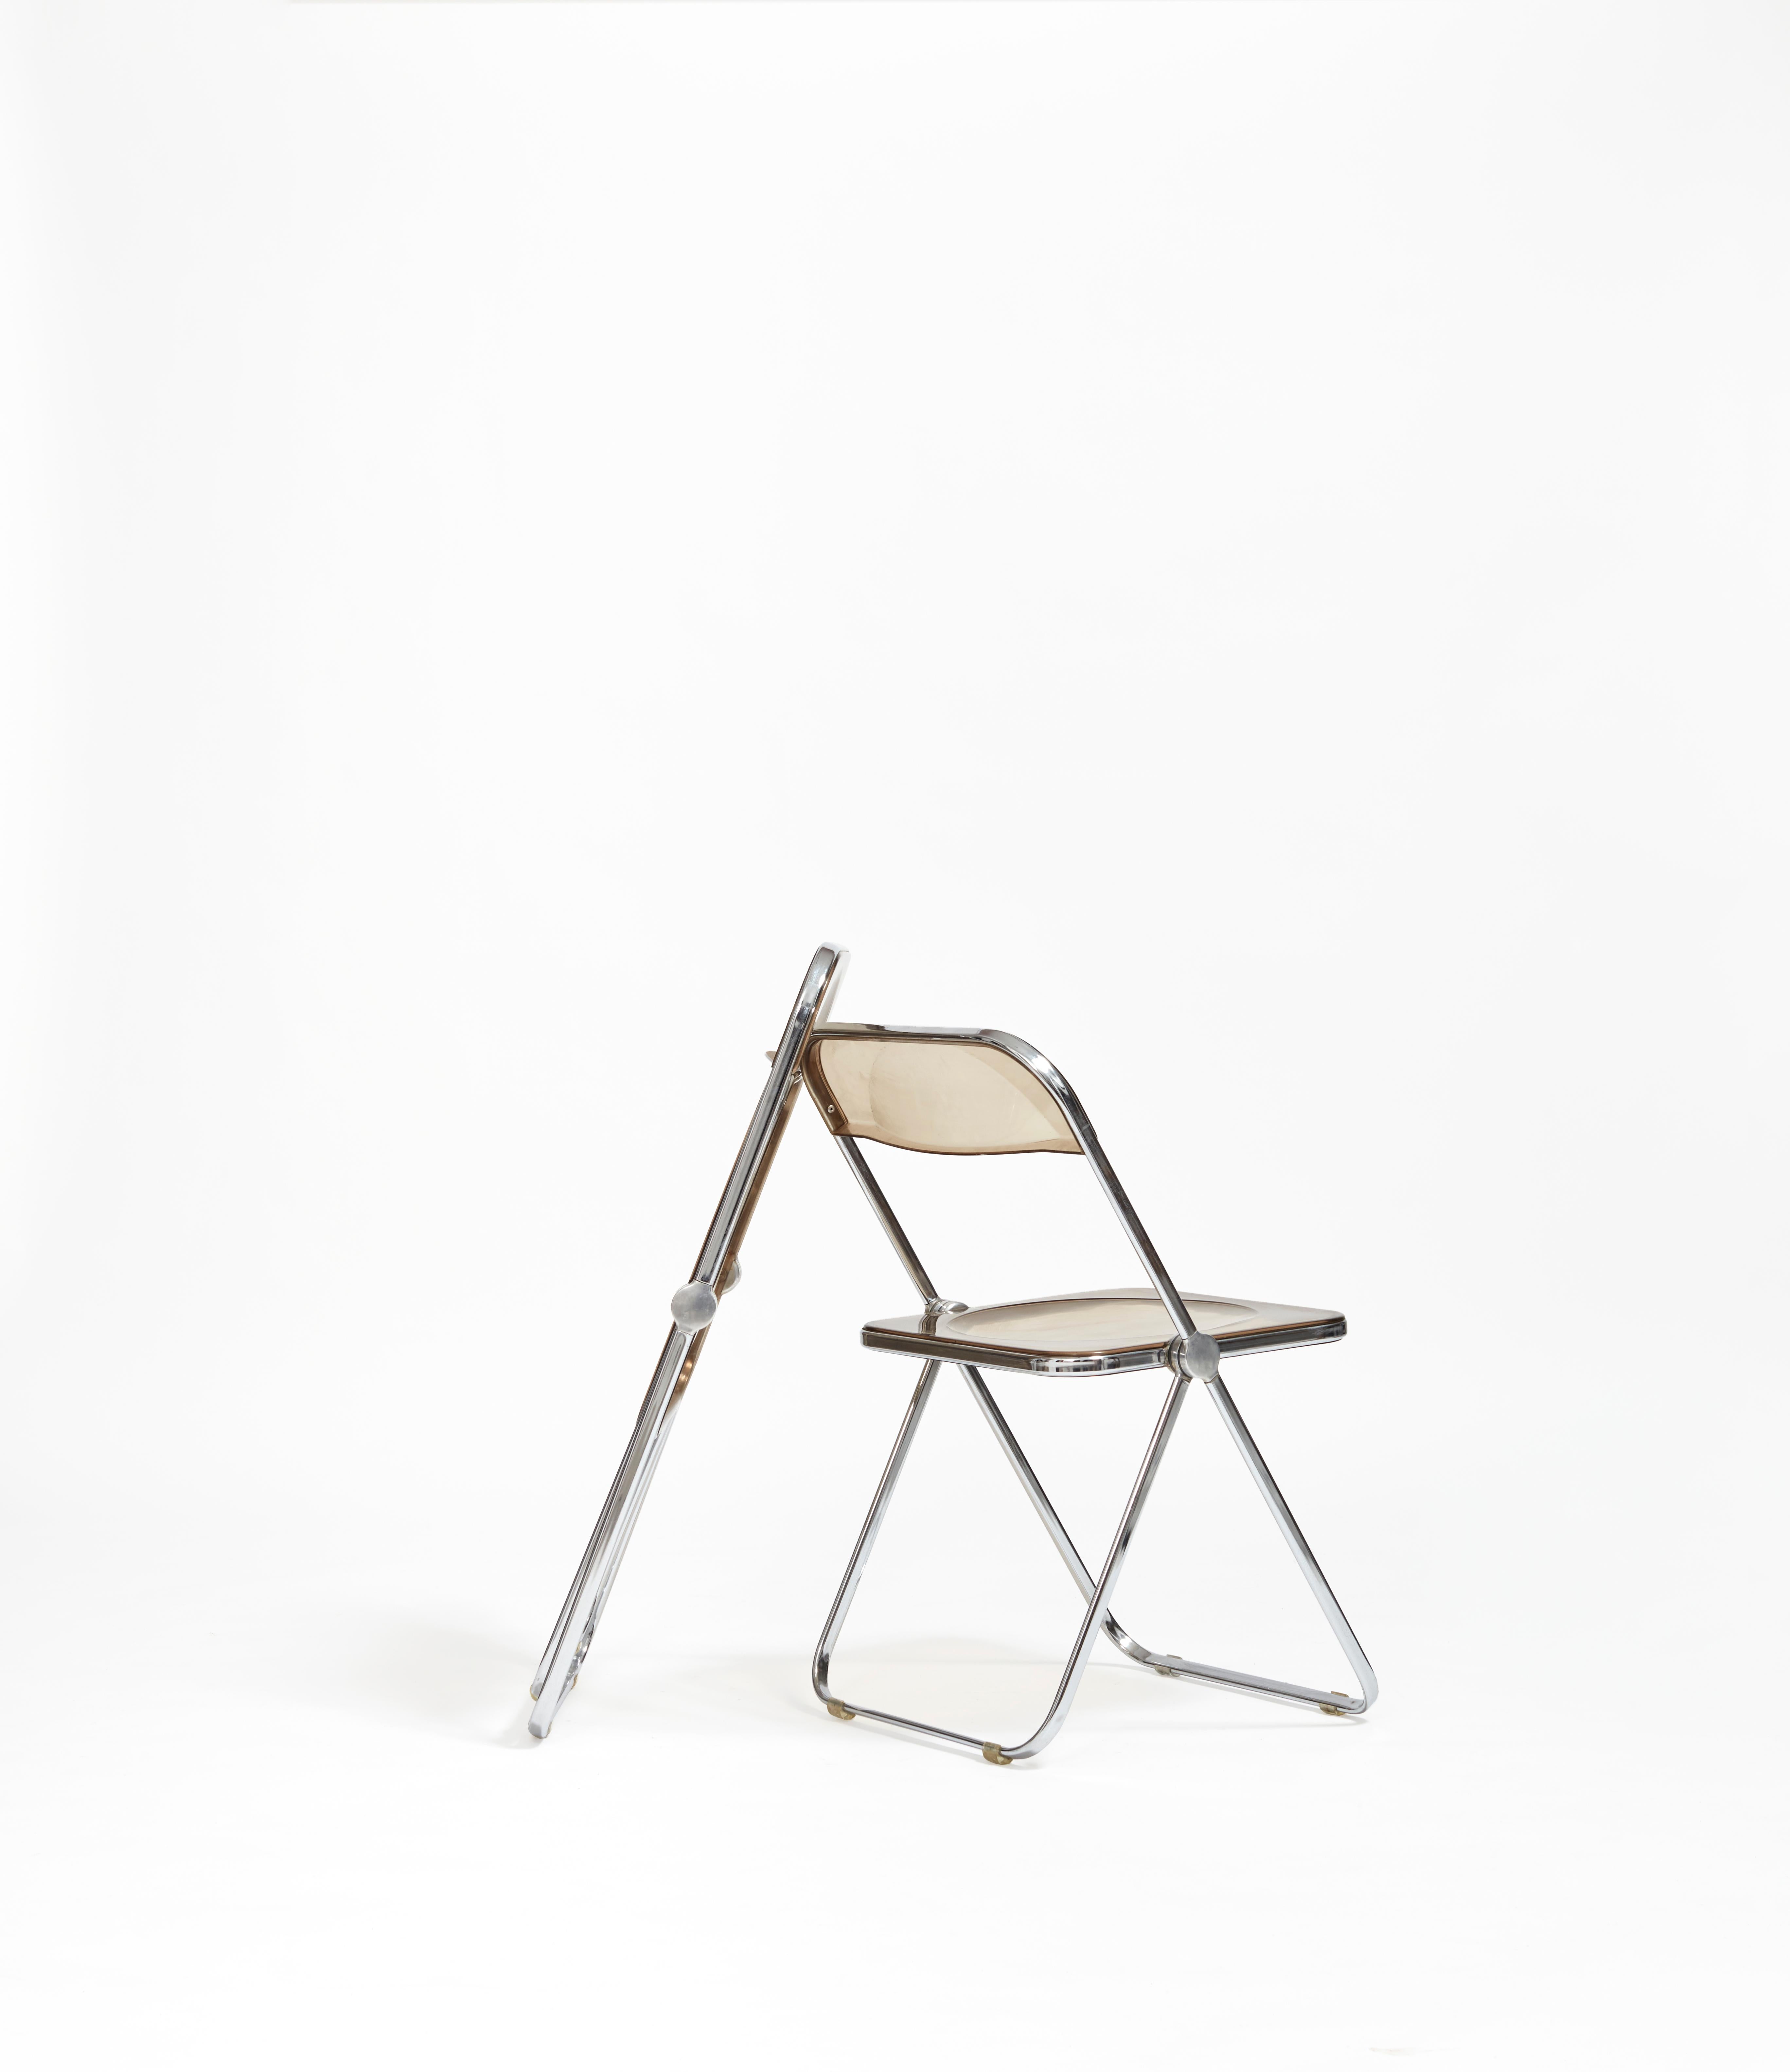 The essential folding chair, the Plia showcases function while marking the move towards transparent furniture design trends from the late 1960s to the 1970s. It is a cult object of the mid-century transition around practical solutions for urbanized